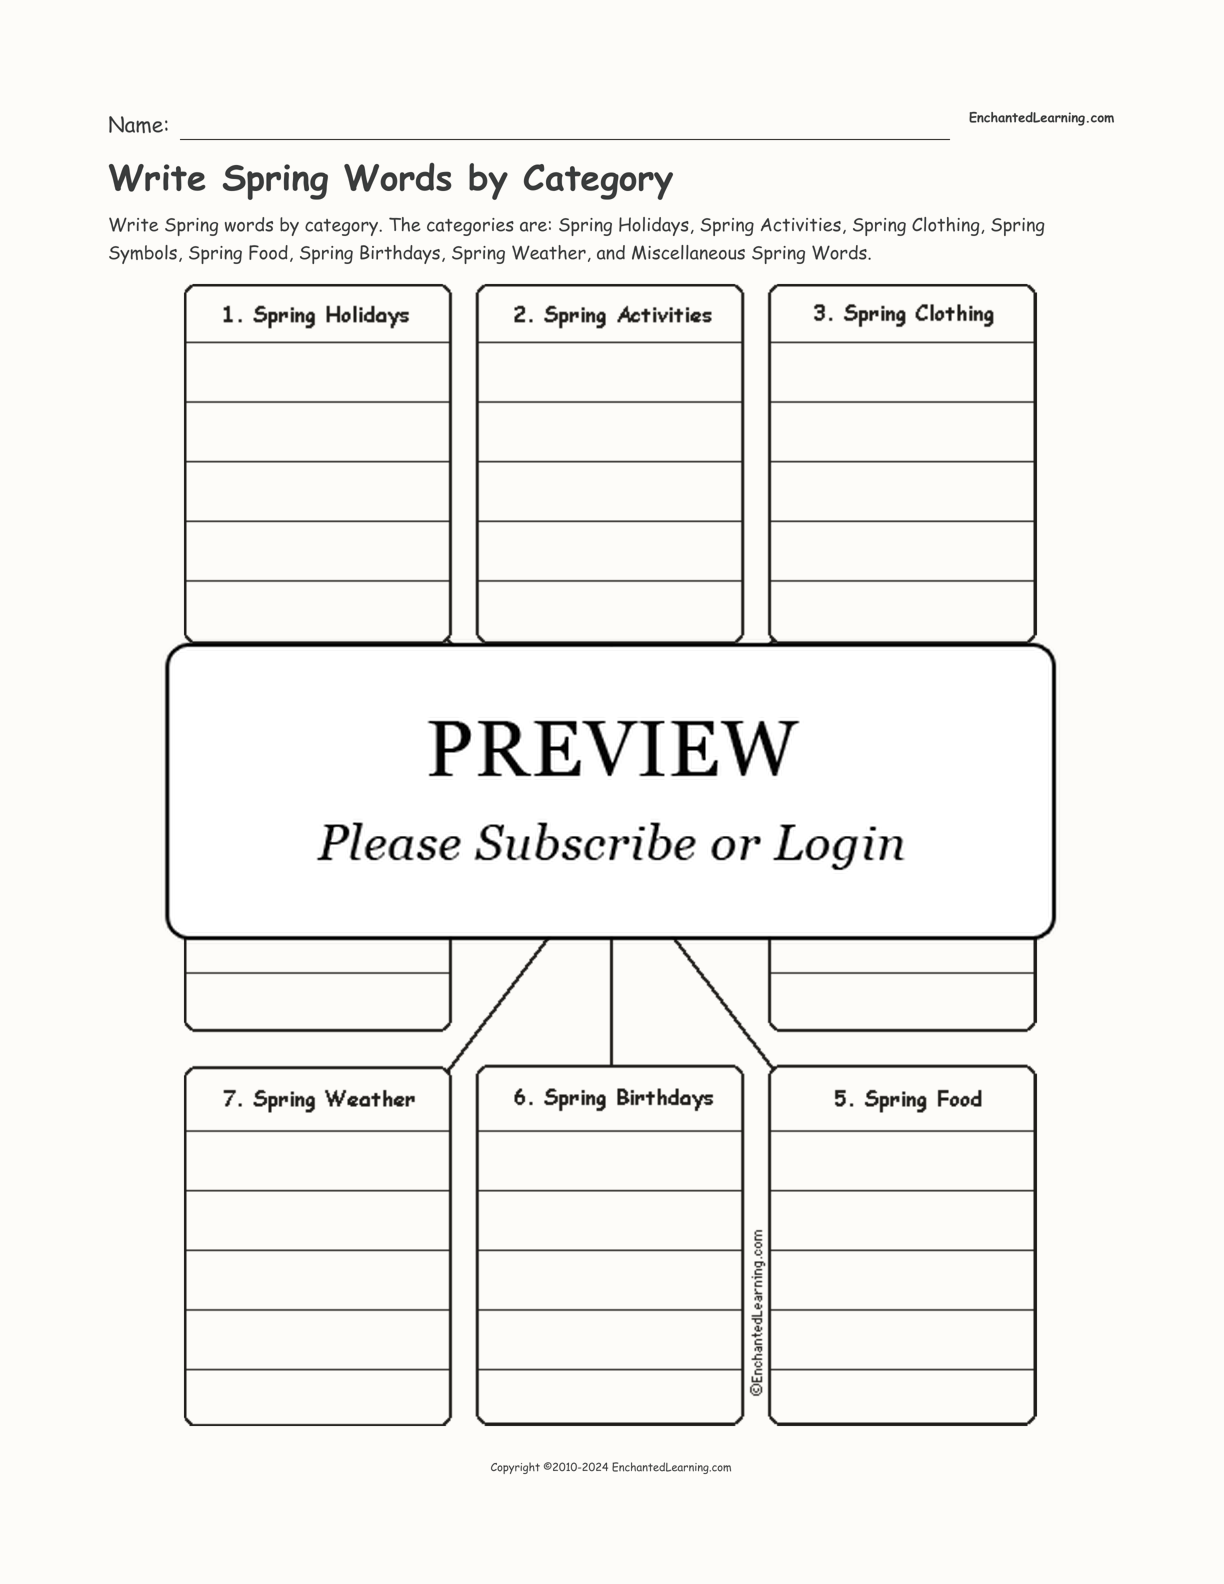 Write Spring Words by Category interactive worksheet page 1